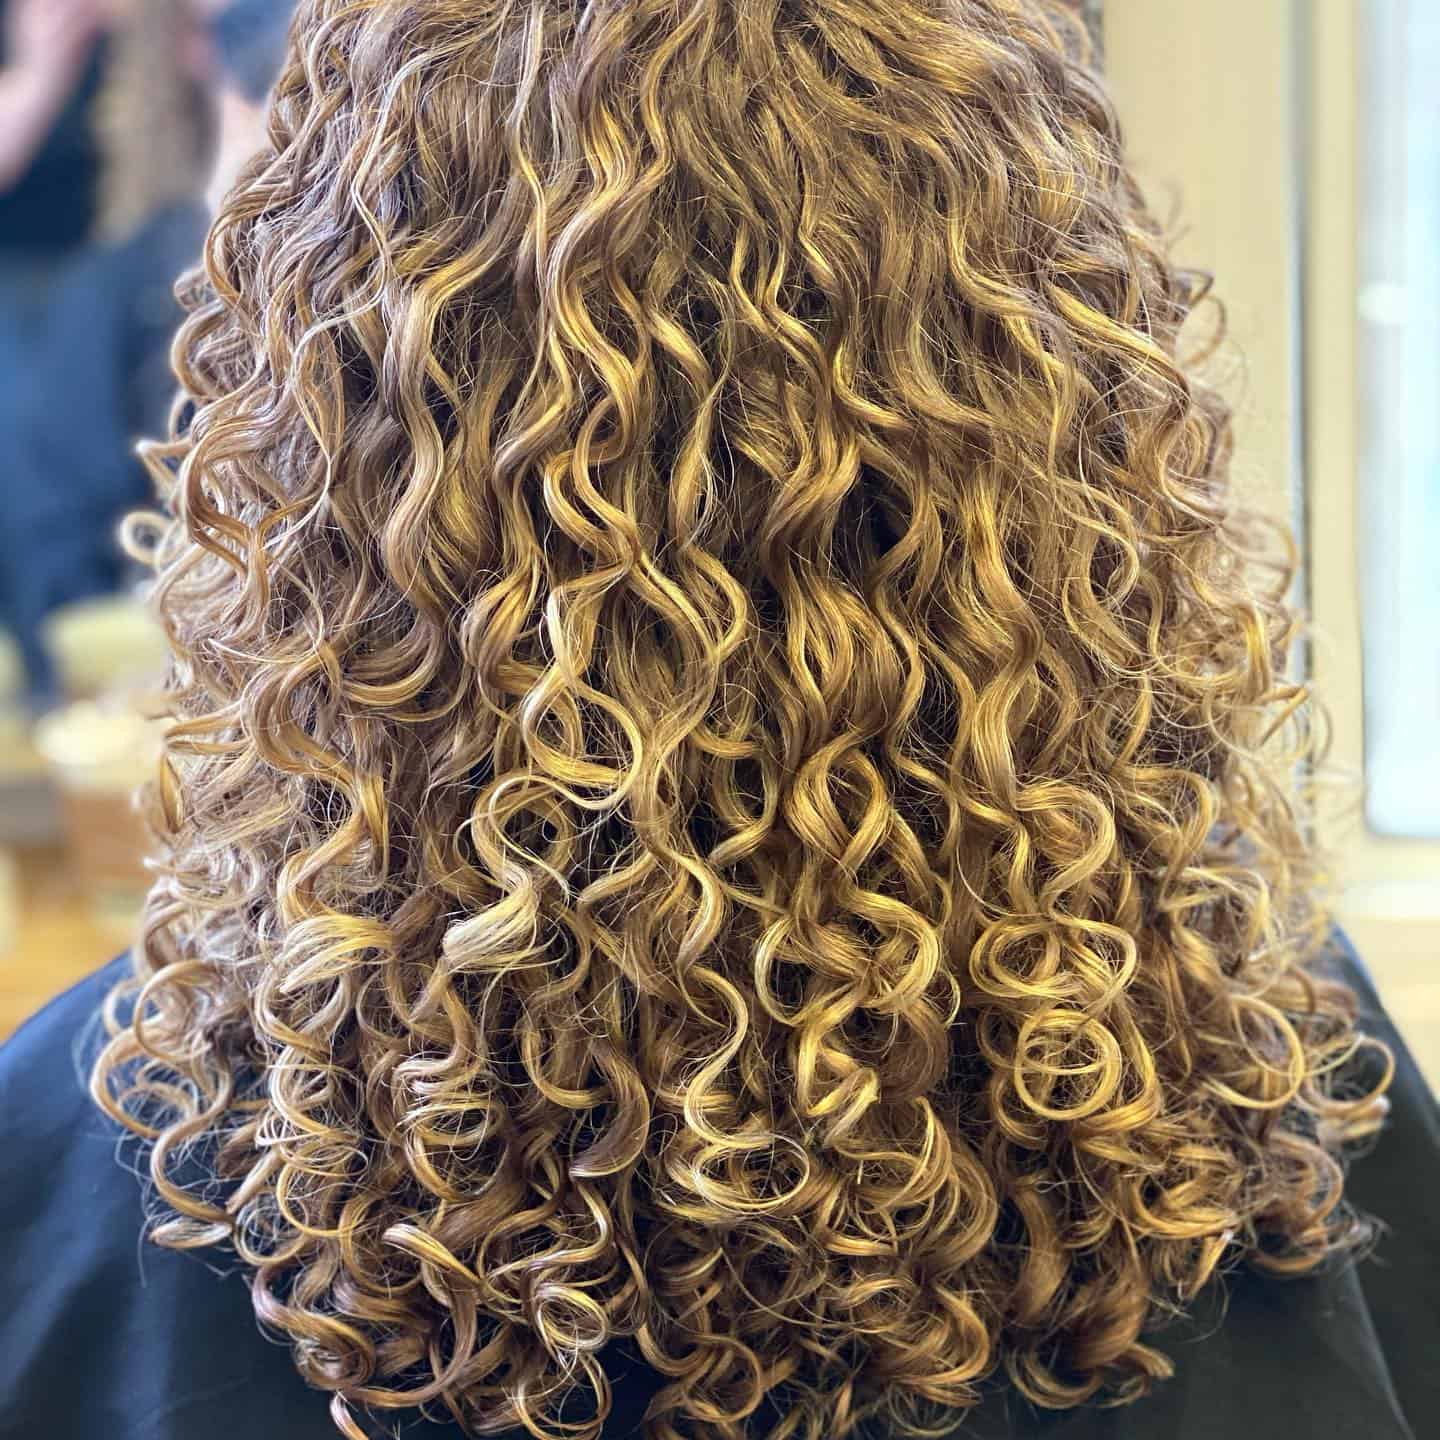 20 Best Curly Hair Salons In London - Winterville